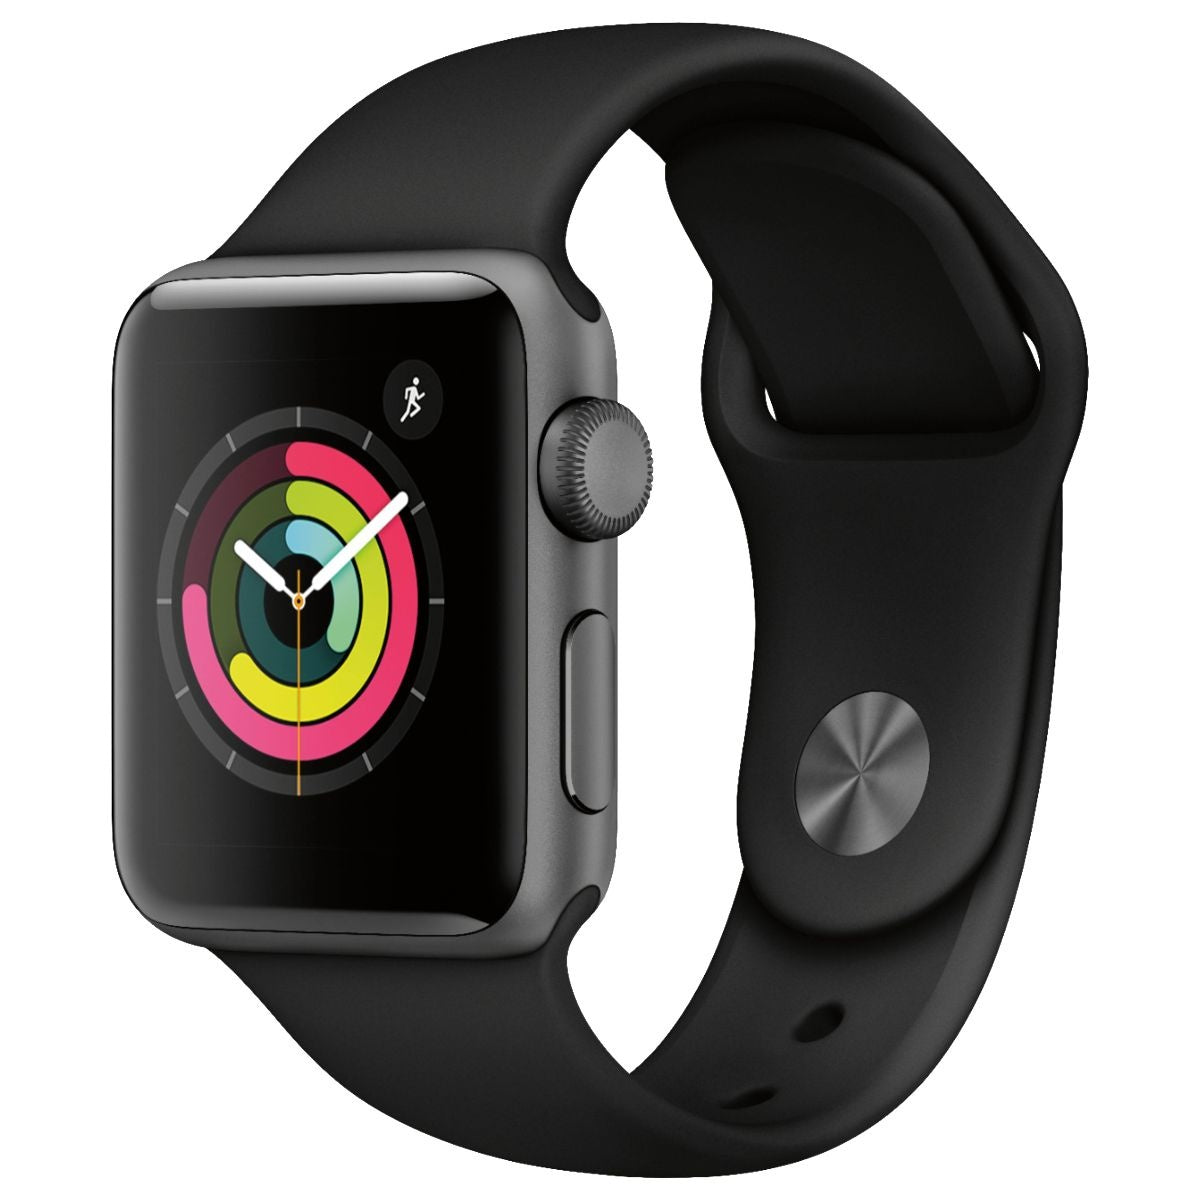 Apple Watch Series 3 (A1860) GPS + LTE - 38mm Space Gray/Black Sport Band